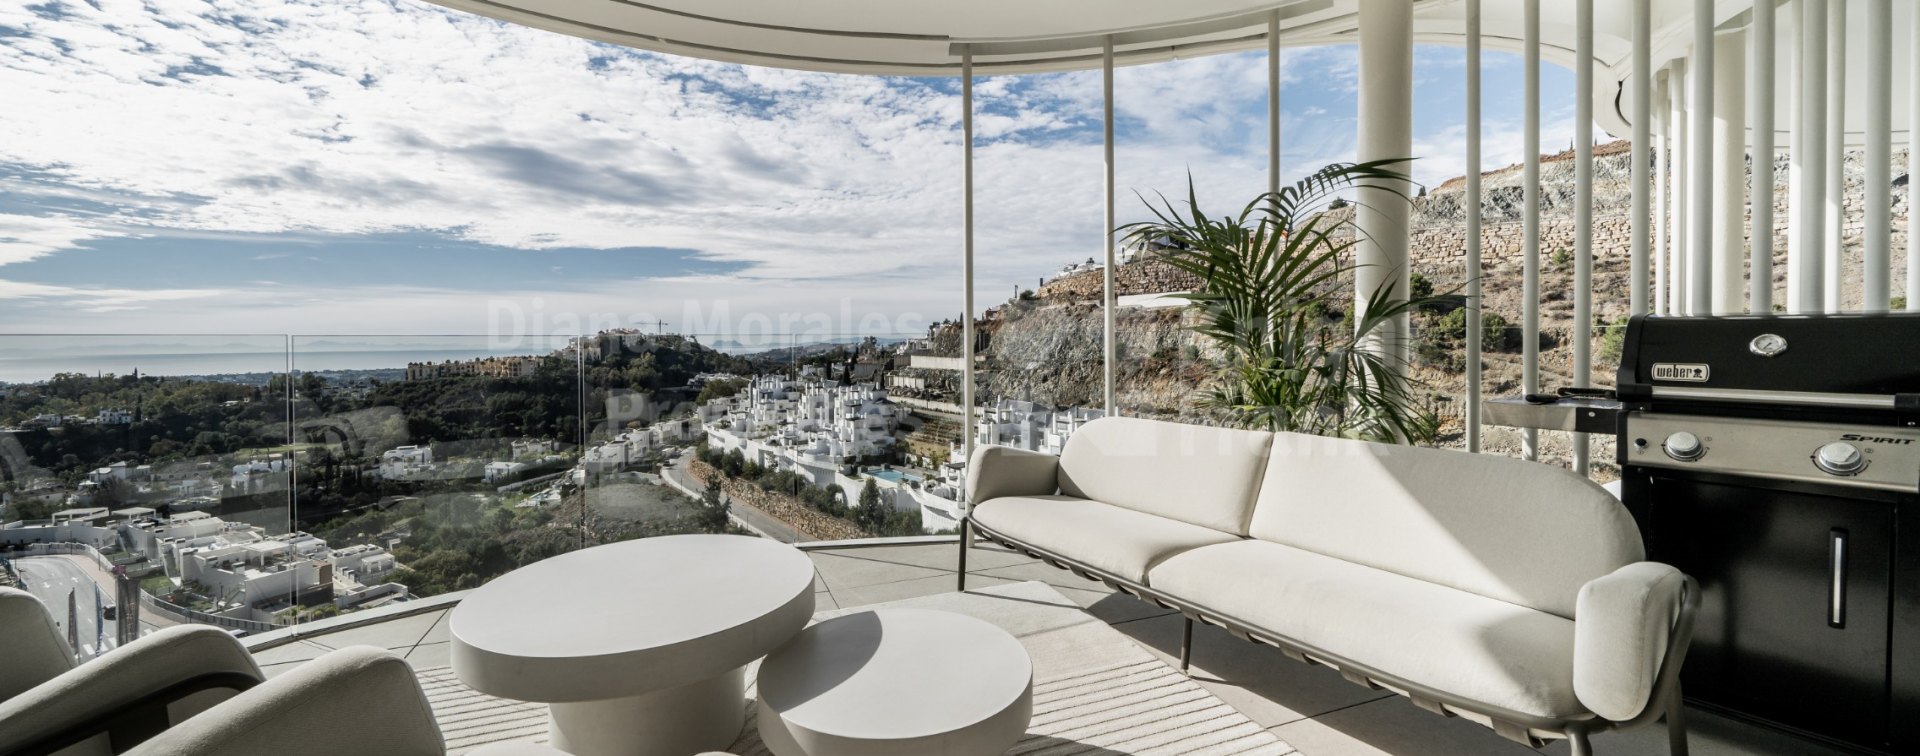 The View Marbella, Modern flat in gated community and panoramic views